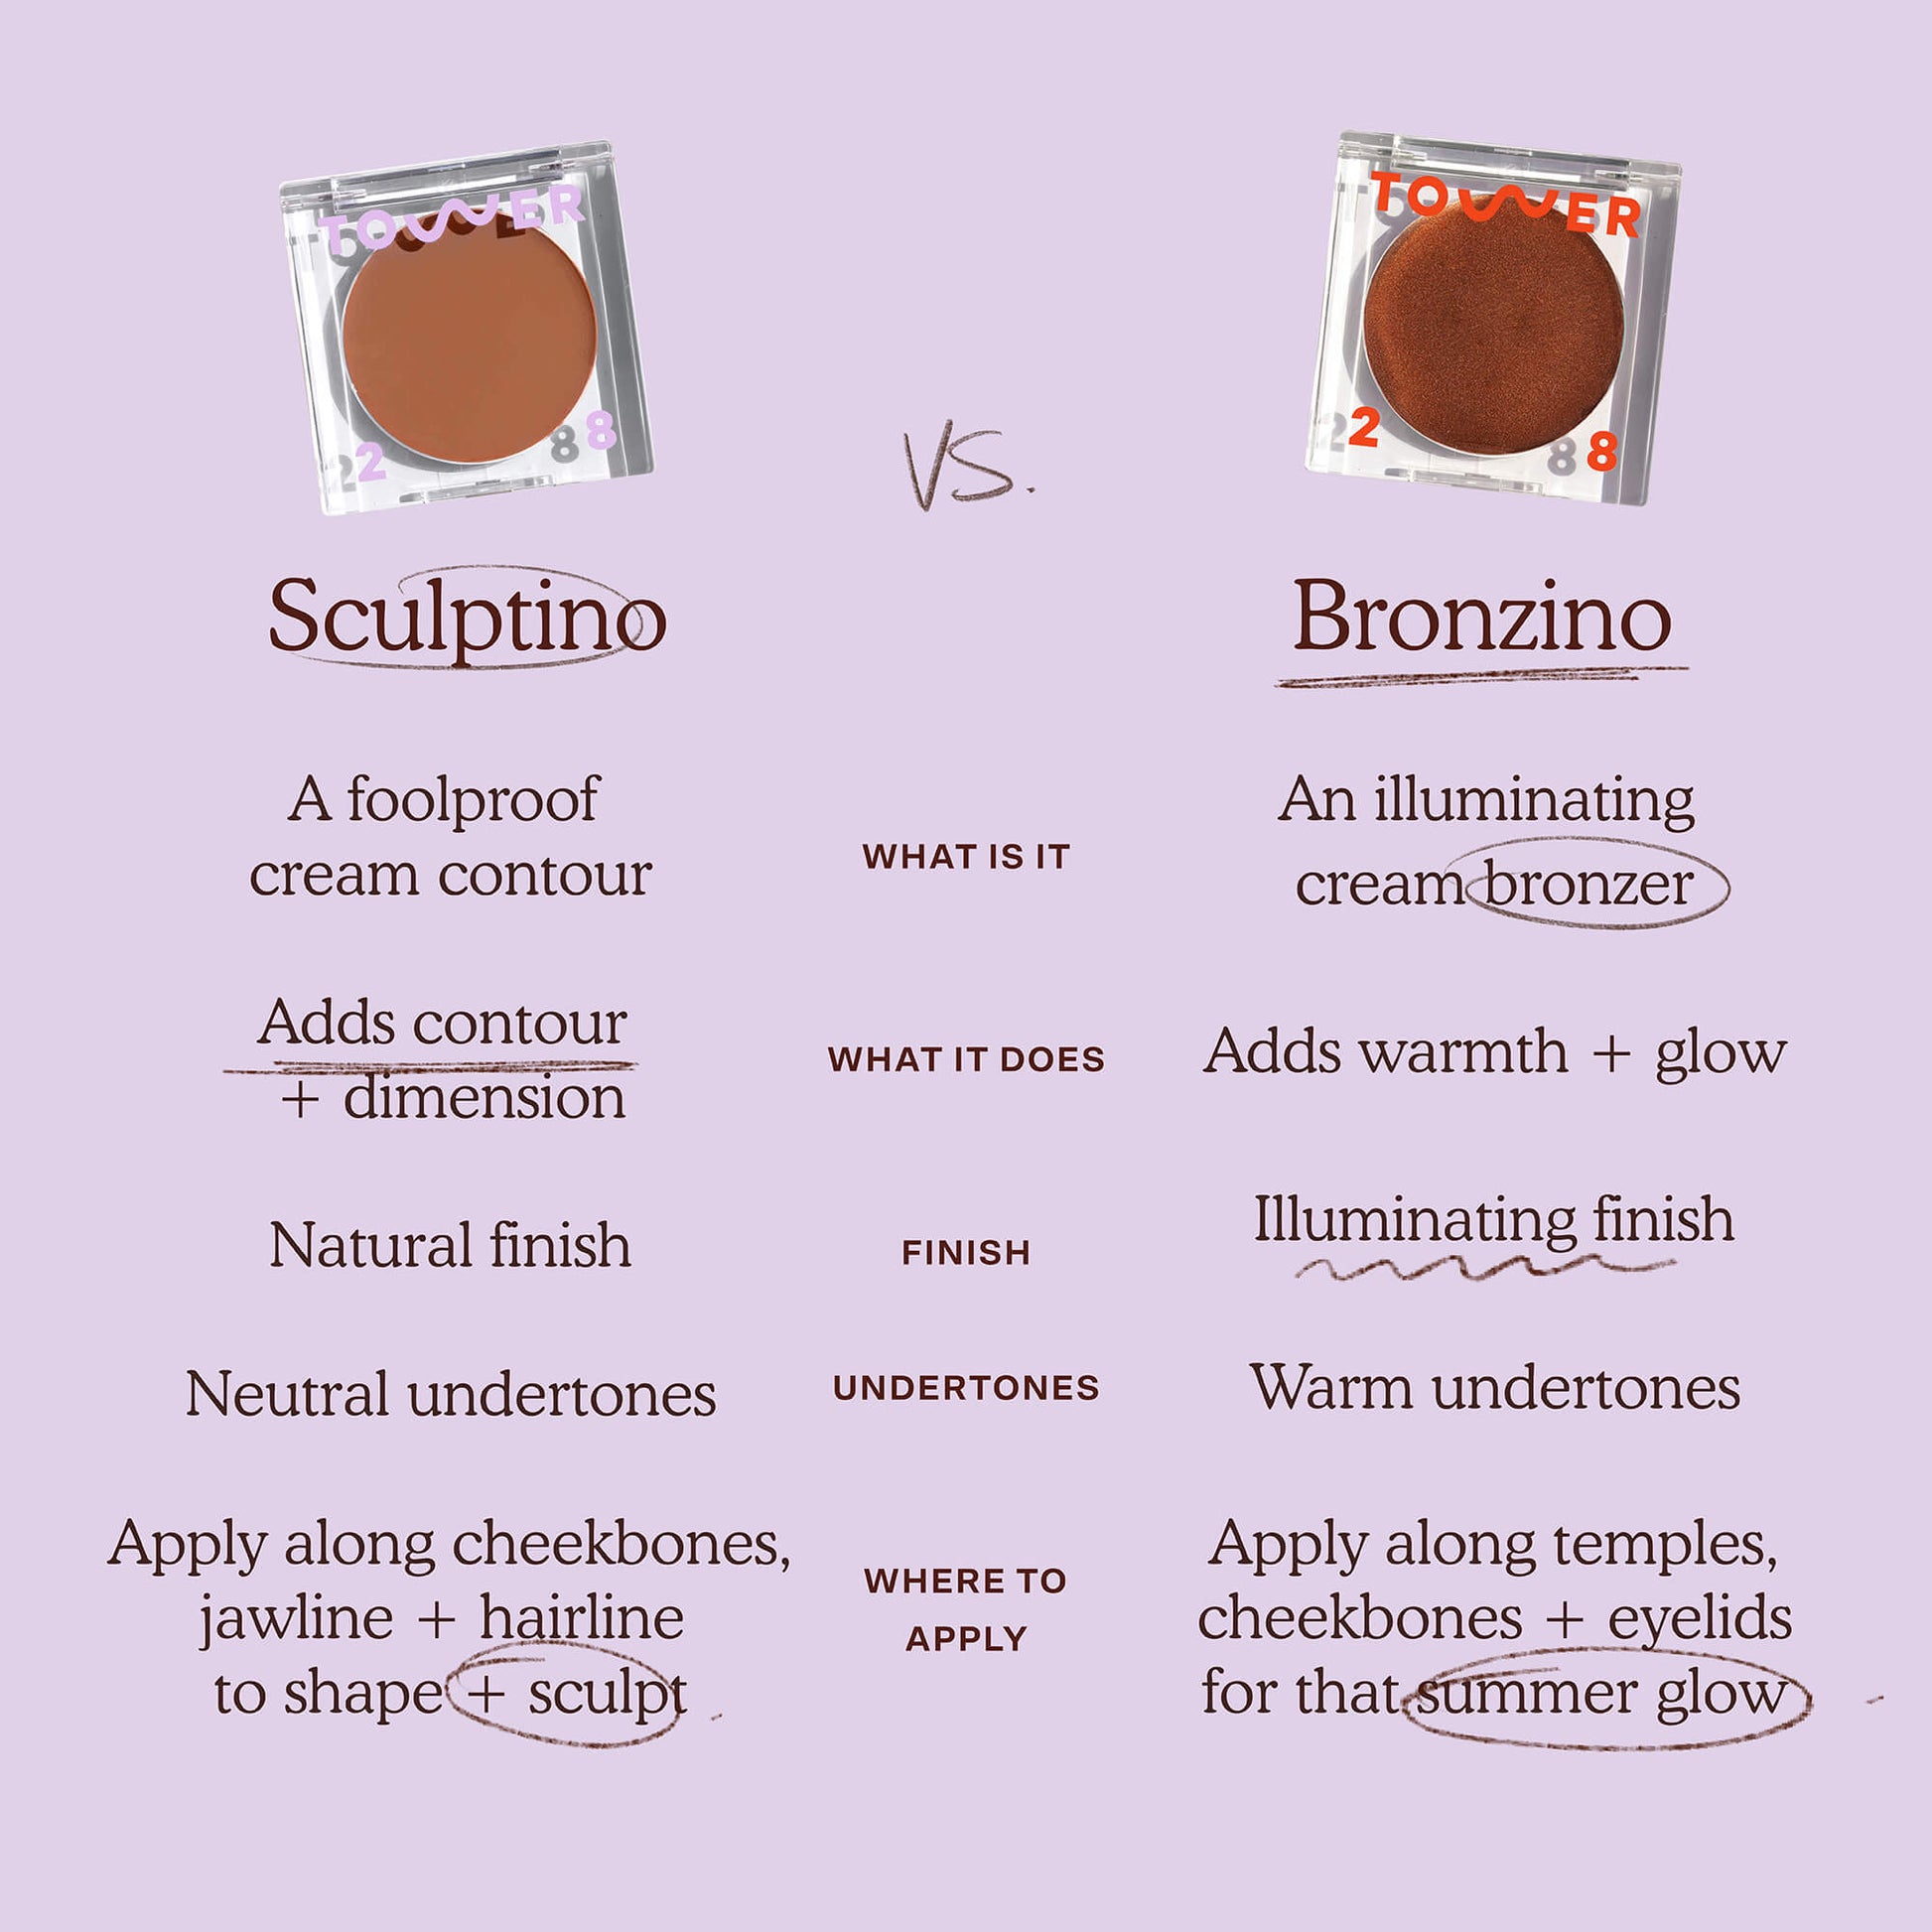 [Shared: A chart that will help you differentiate between the Tower 28 Beauty Sculptino™ Cream Contour and Bronzino ™ Cream Contour